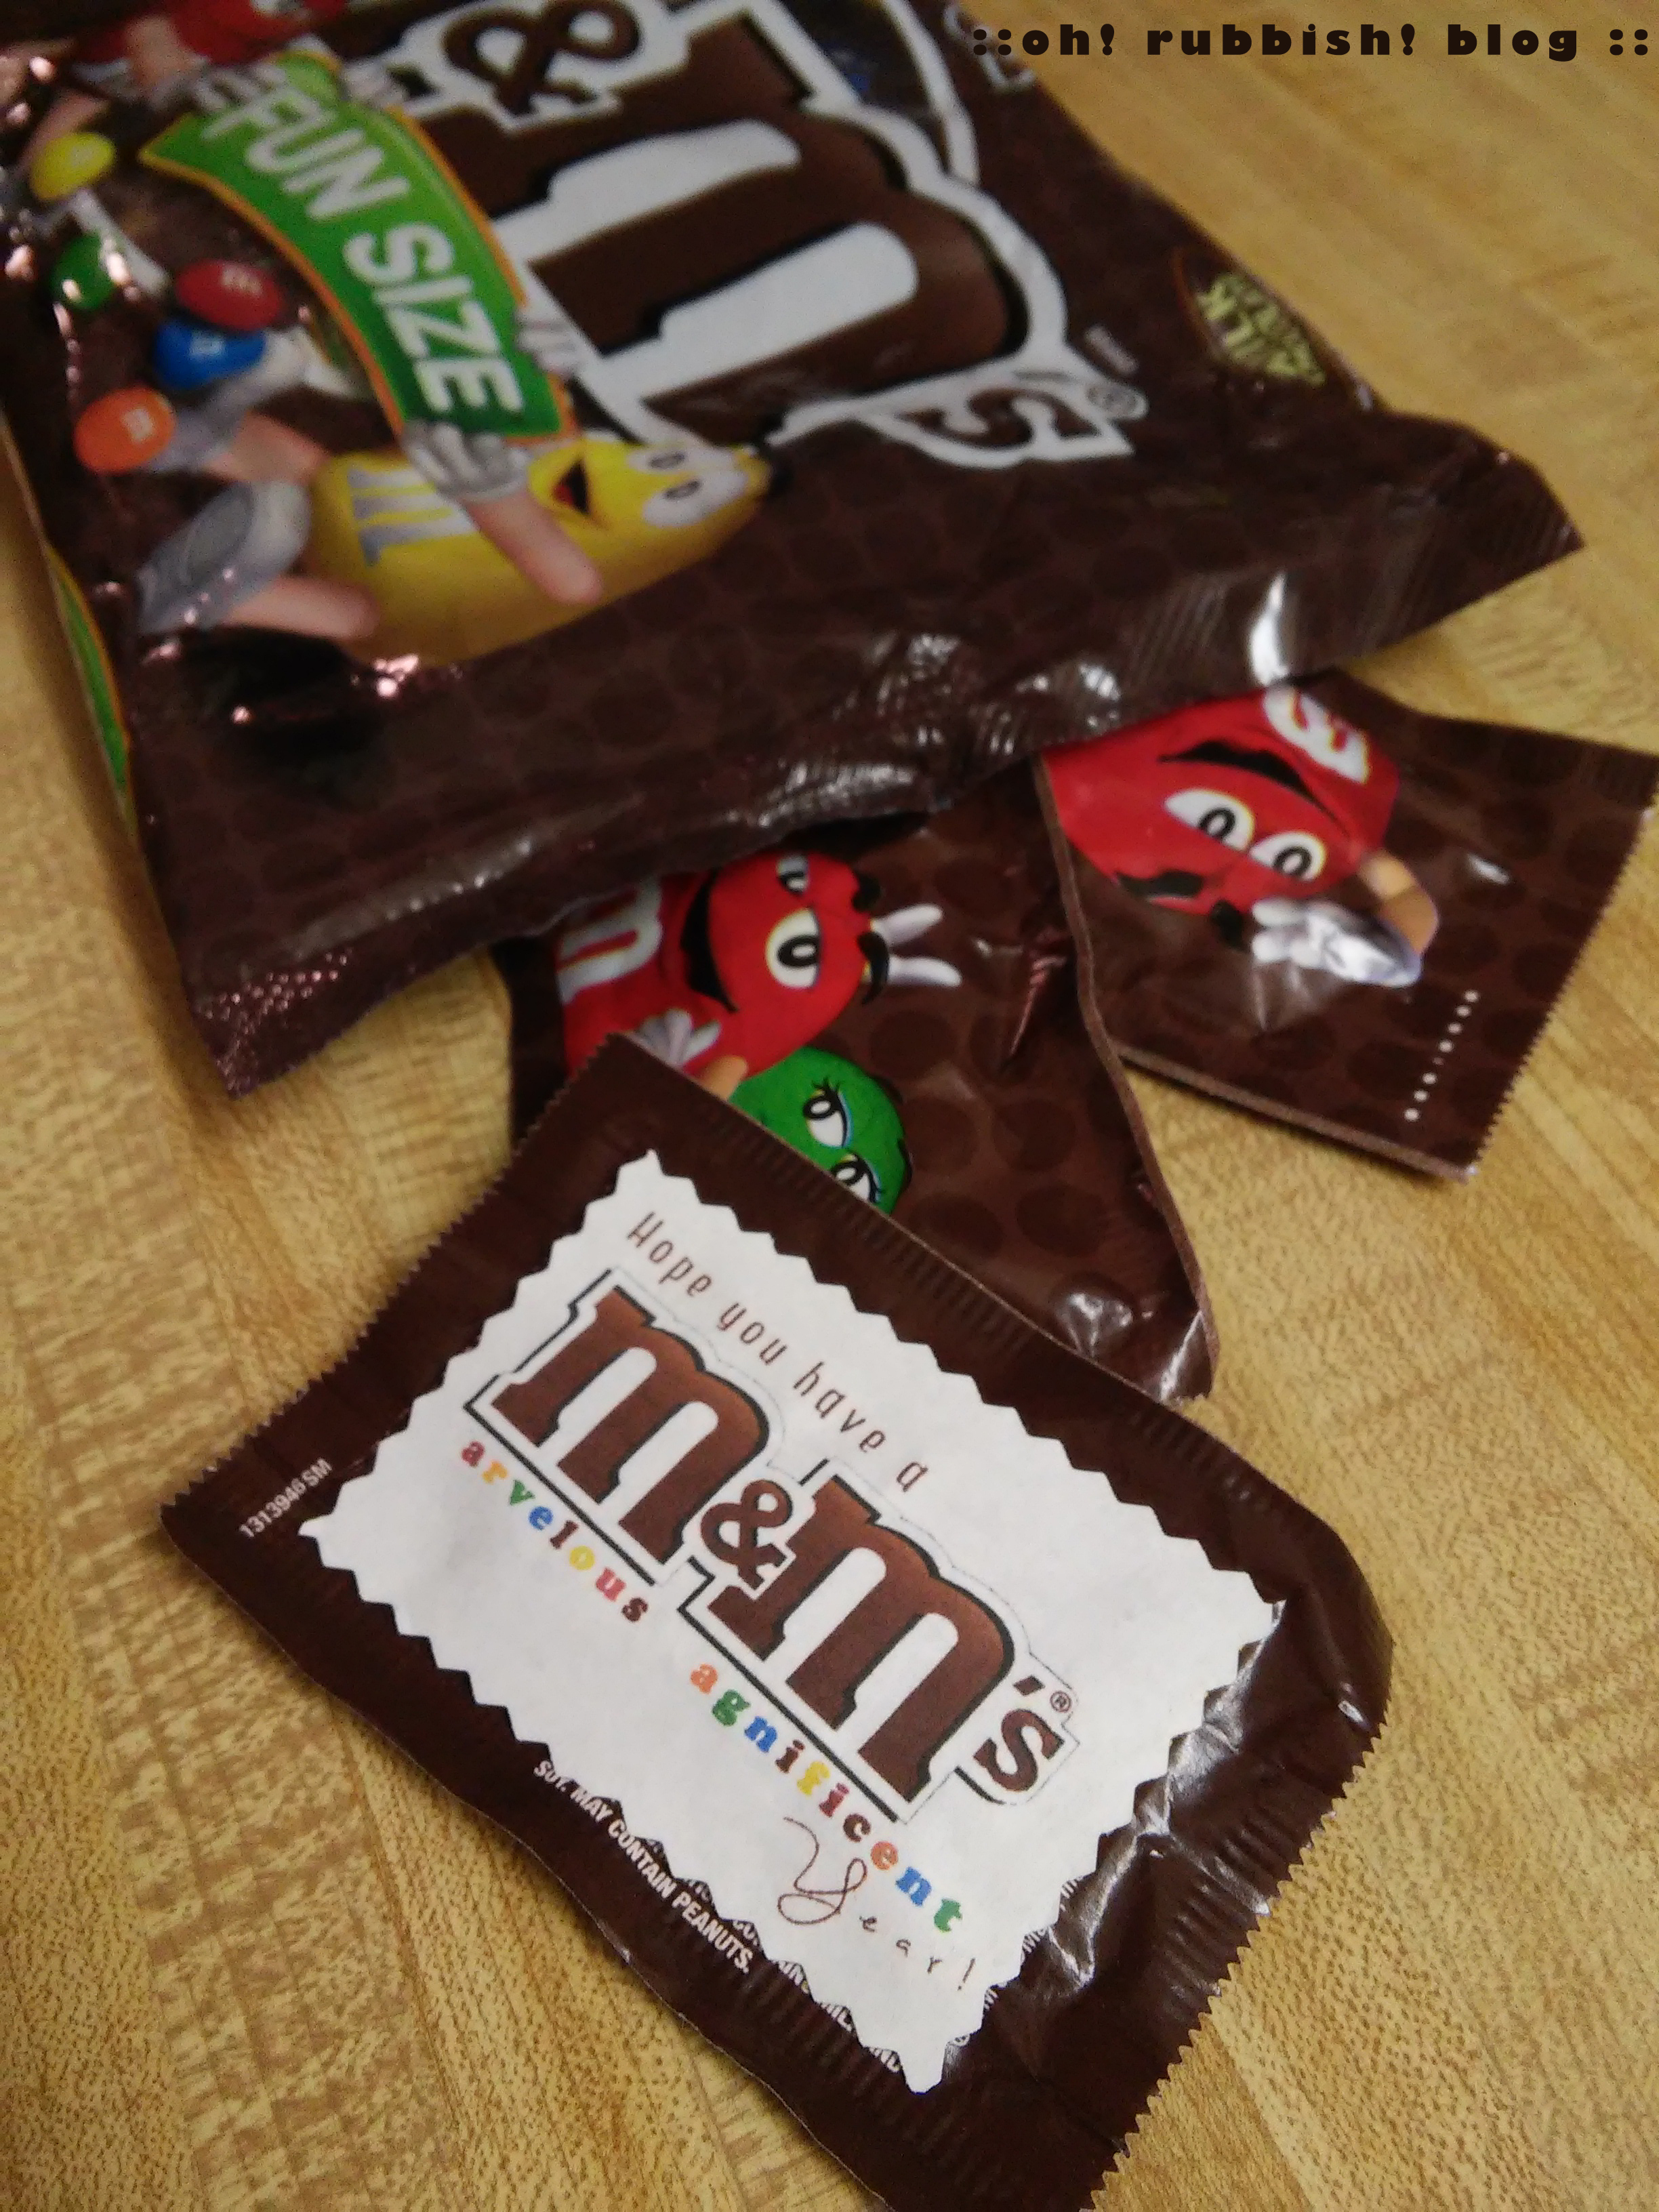  Hope You Have an M&M Year! Back To School Classroom Favors OH RUBBISH BLOG